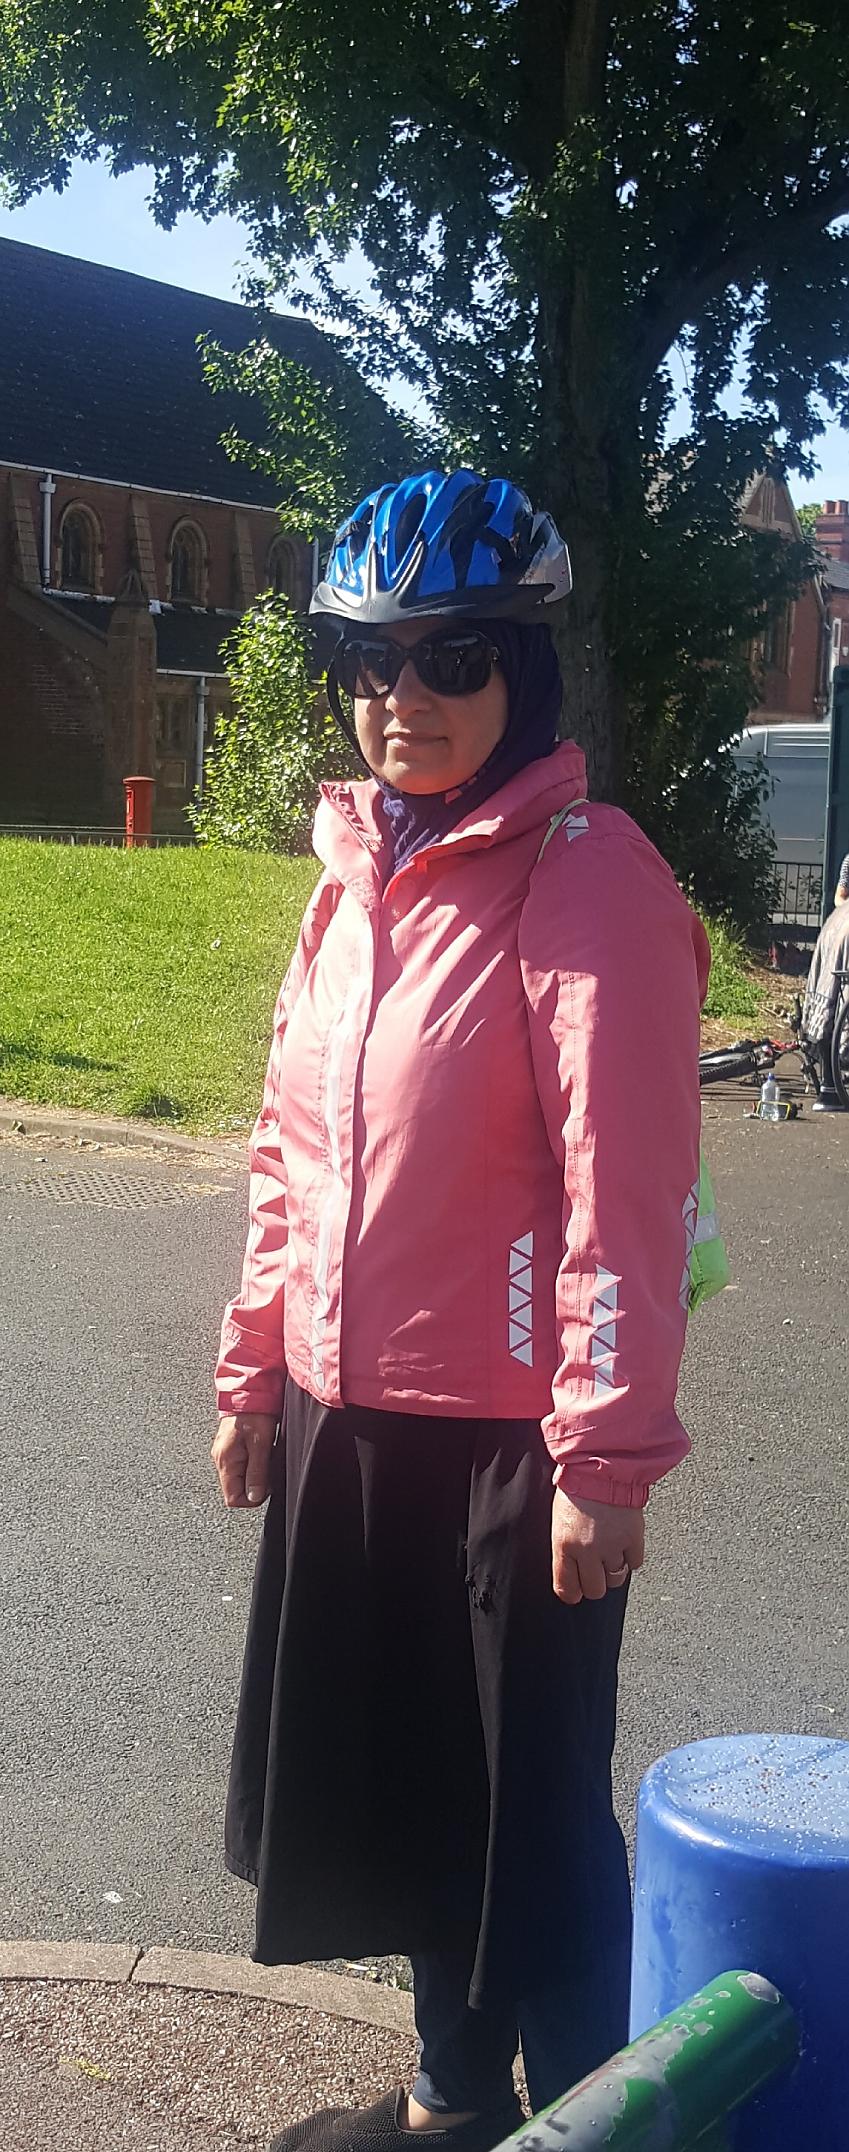 A woman is standing on the pavement. She is wearing a blue cycling helmet, sunglasses, a bright pink hi-viz jacket and a headscarf.